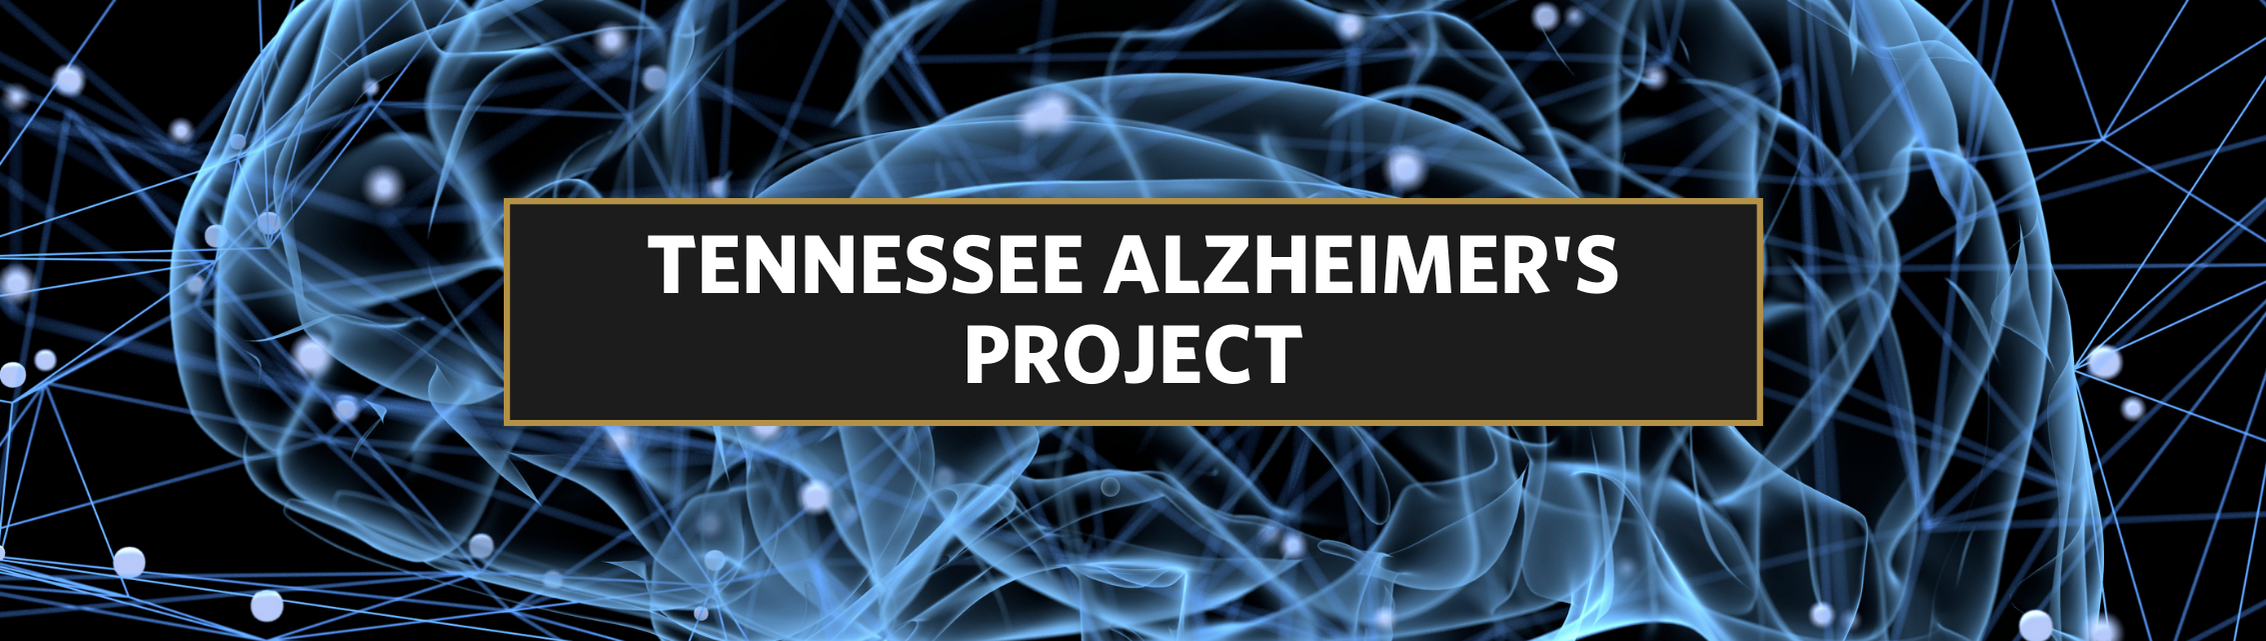 Tennessee Alzheimer's Project